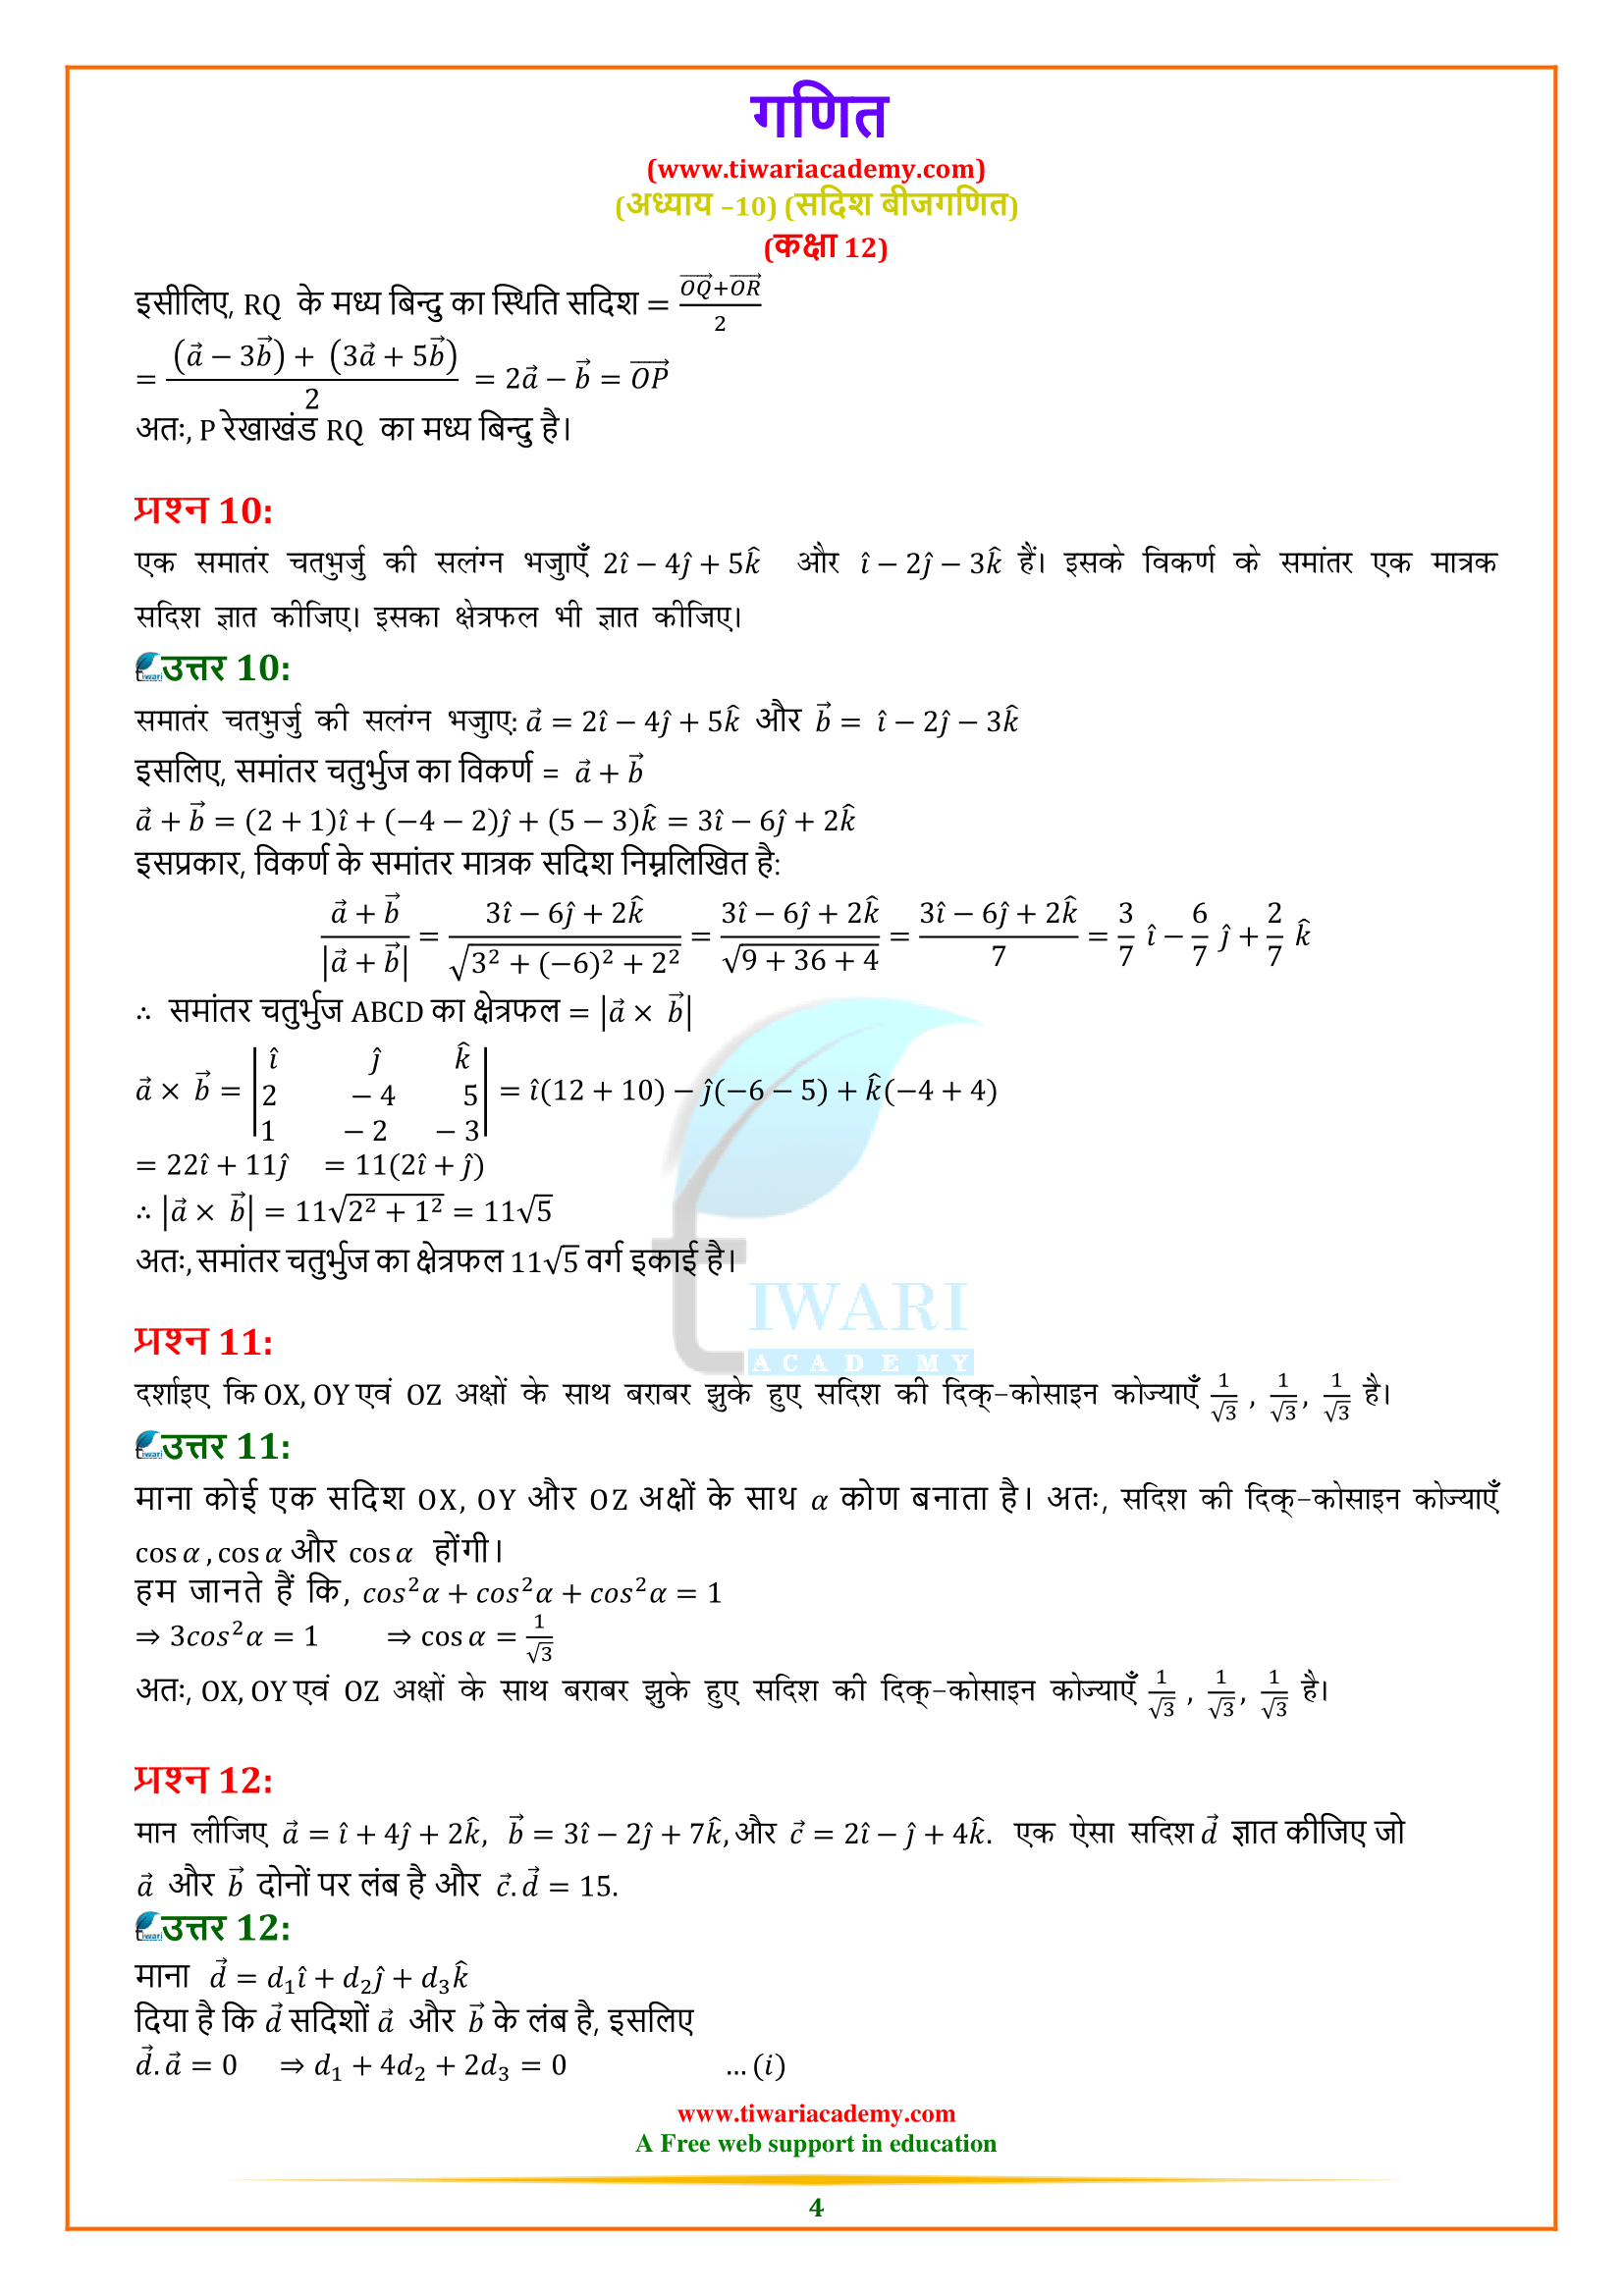 NCERT Solutions for Class 12 Maths Chapter 10 Miscellaneous Exercise in Hindi for mp board